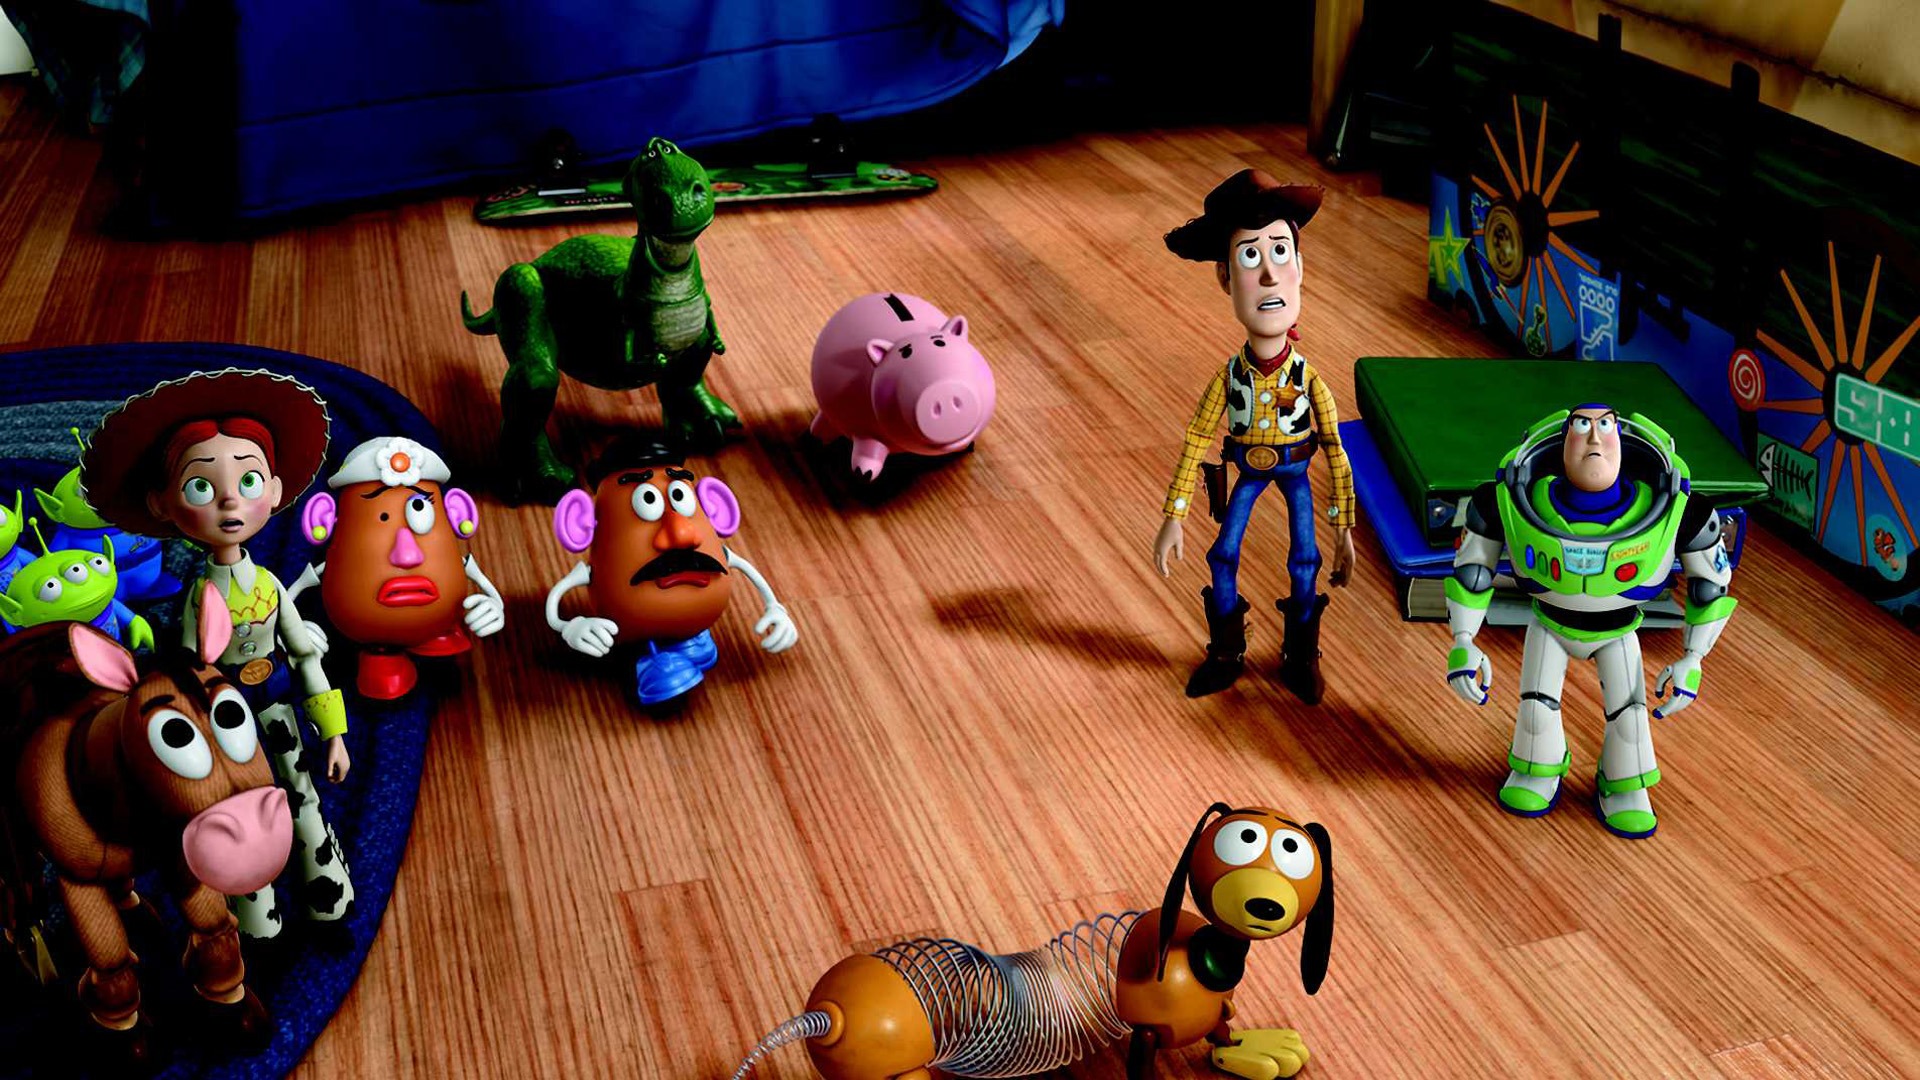 Toy Story 3 HD wallpaper #21 - 1920x1080 Wallpaper Download - Toy ...